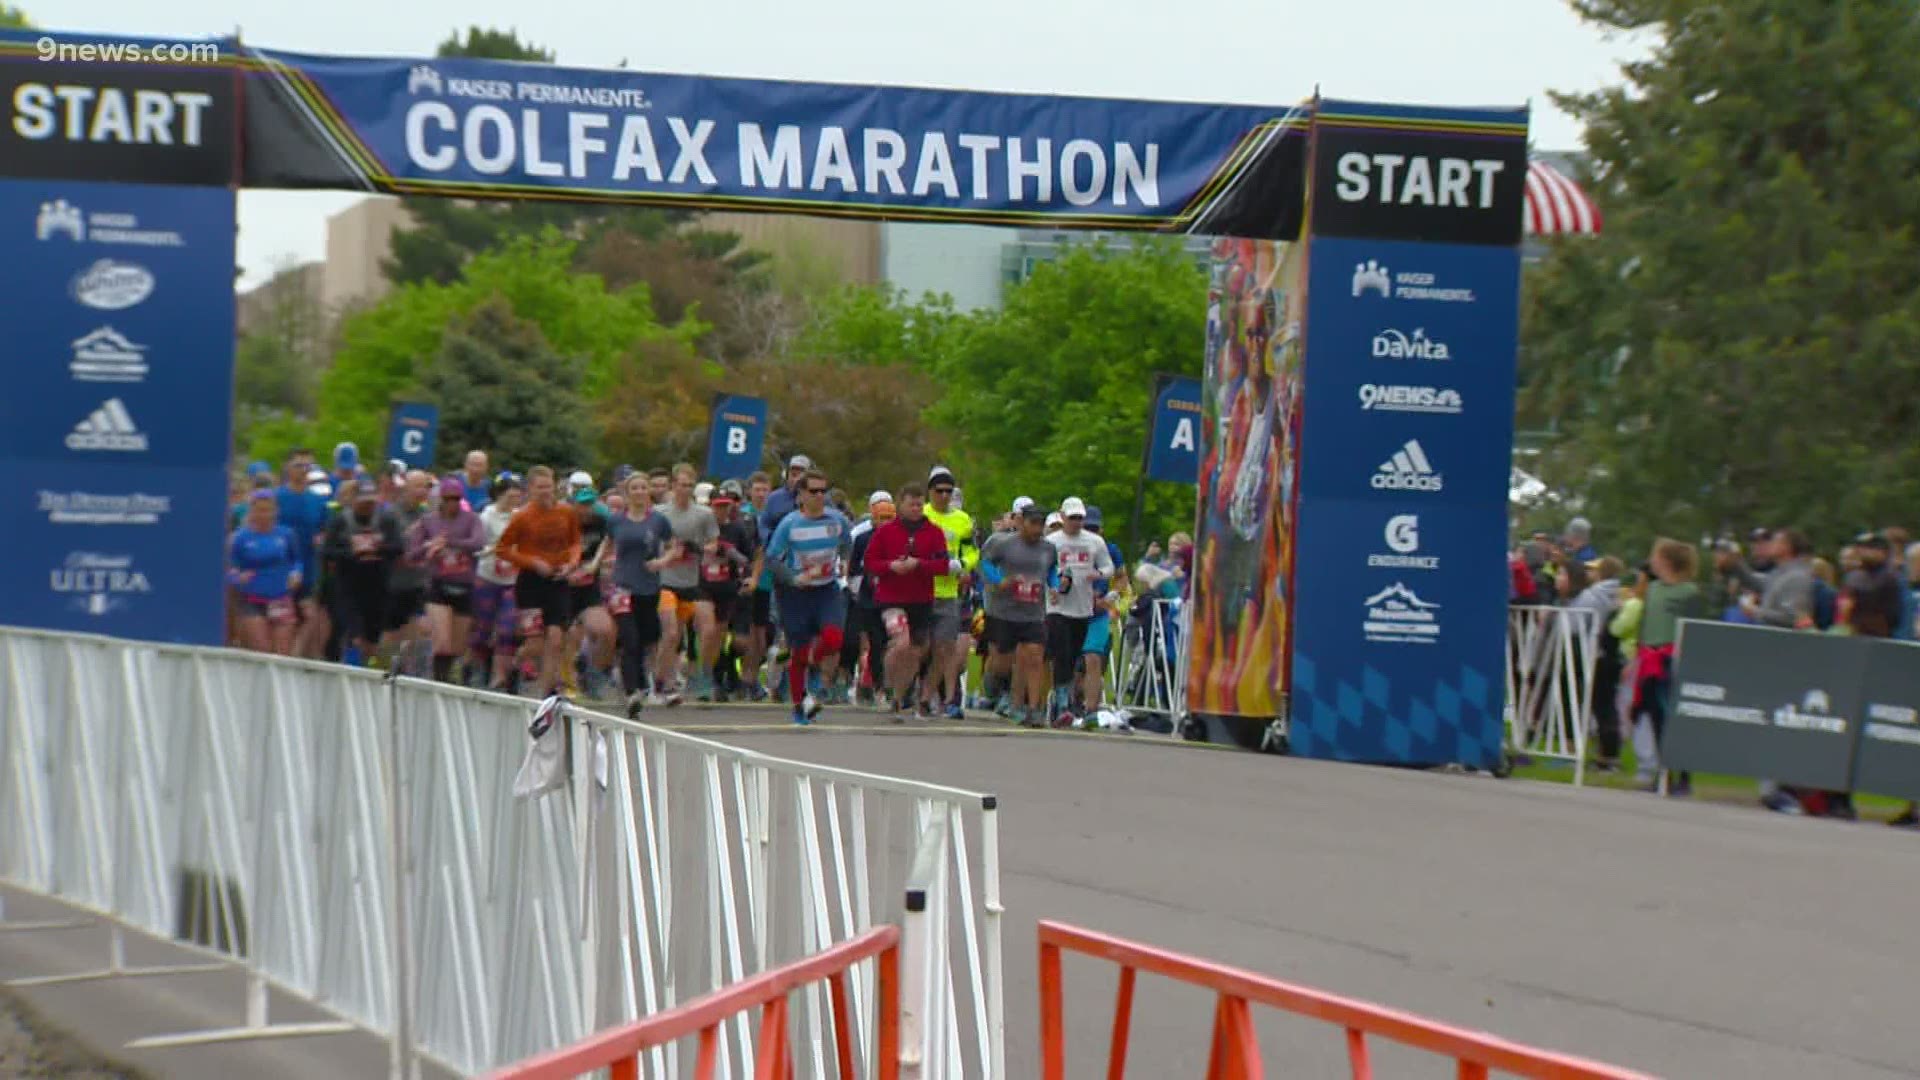 The COVID-19-safe event will take place on the nonprofit's normal marathon weekend.